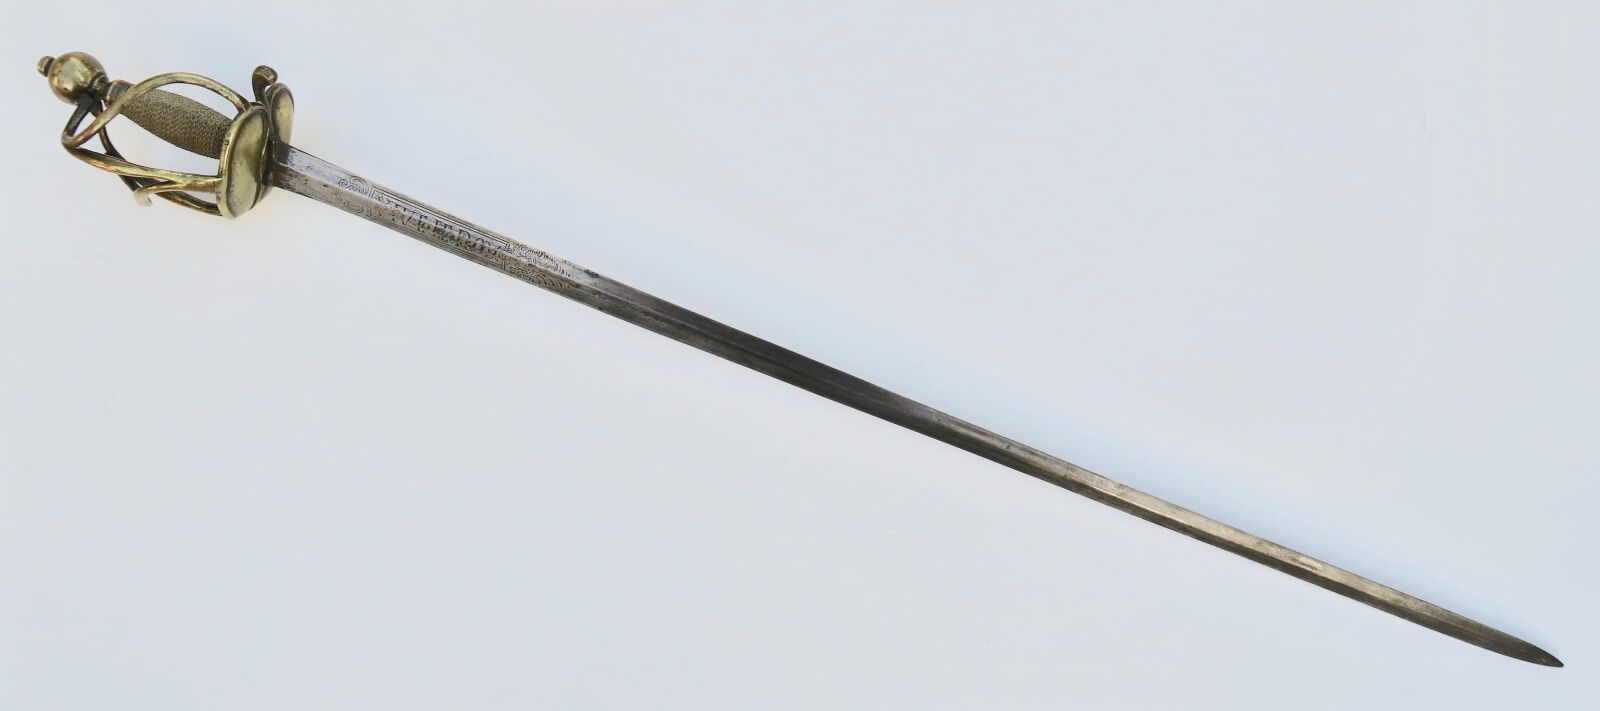 Null Strong sword. Variant of the 1734 model that appeared during the War of the&hellip;